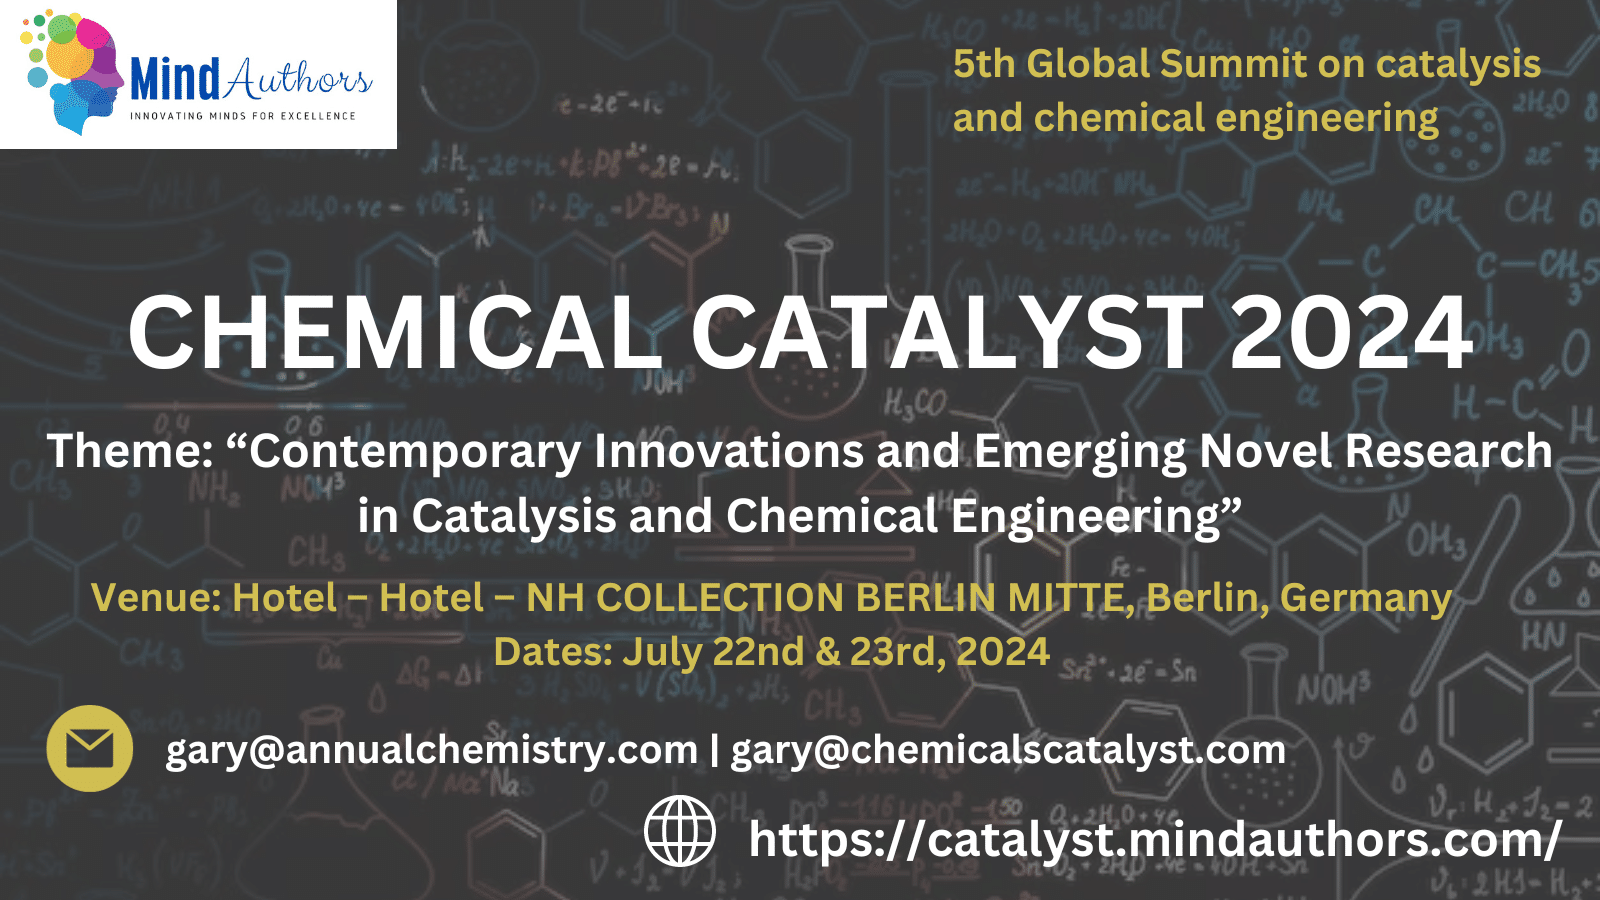 5th Global Summit on catalysis and chemical engineering